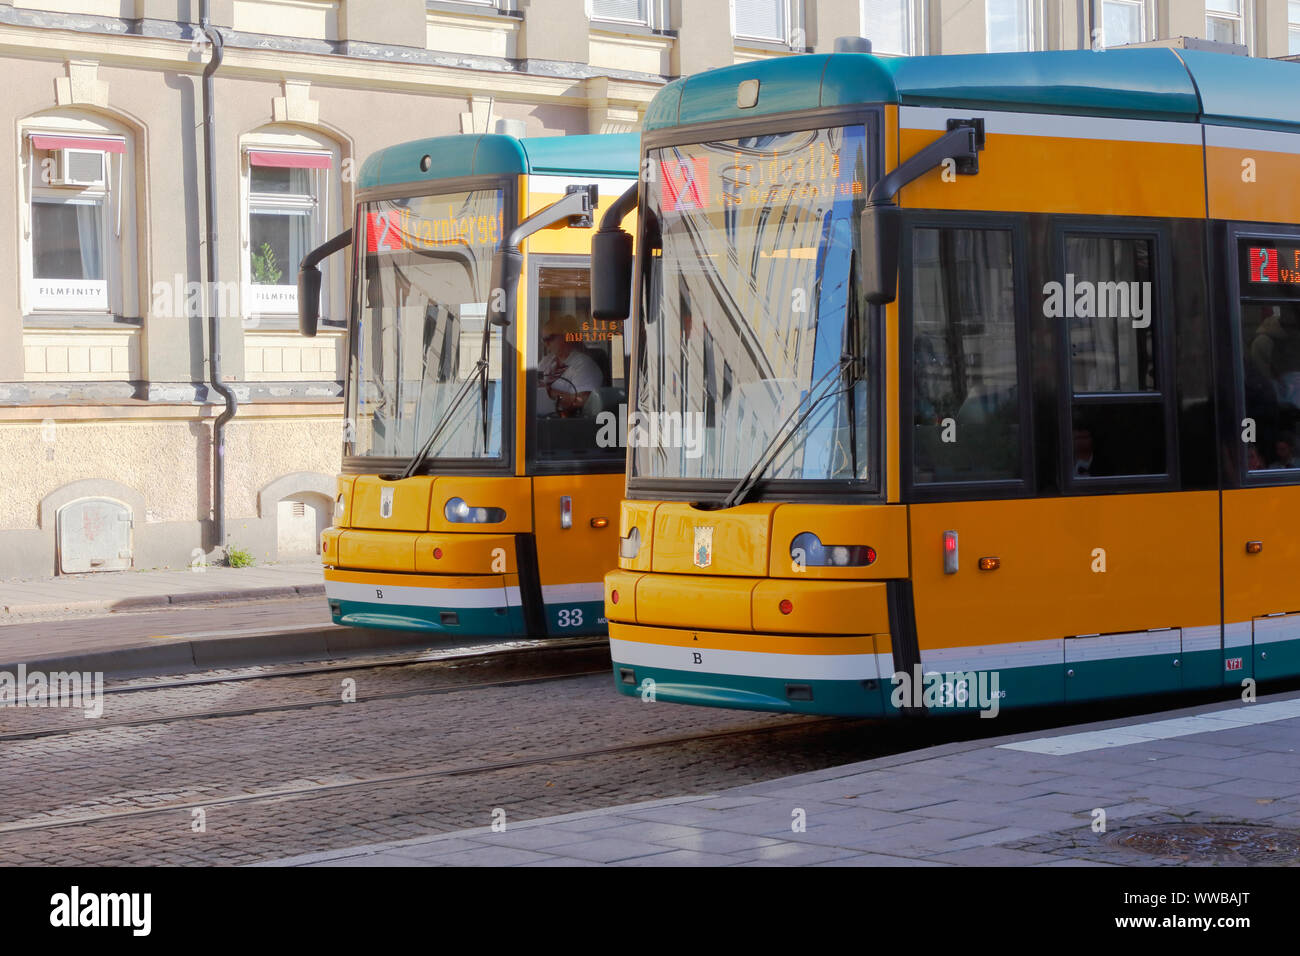 Norrkoping, September 2, 2019: Two yellow trams class M06 in Norrkoping city center in service on line 2. Stock Photo